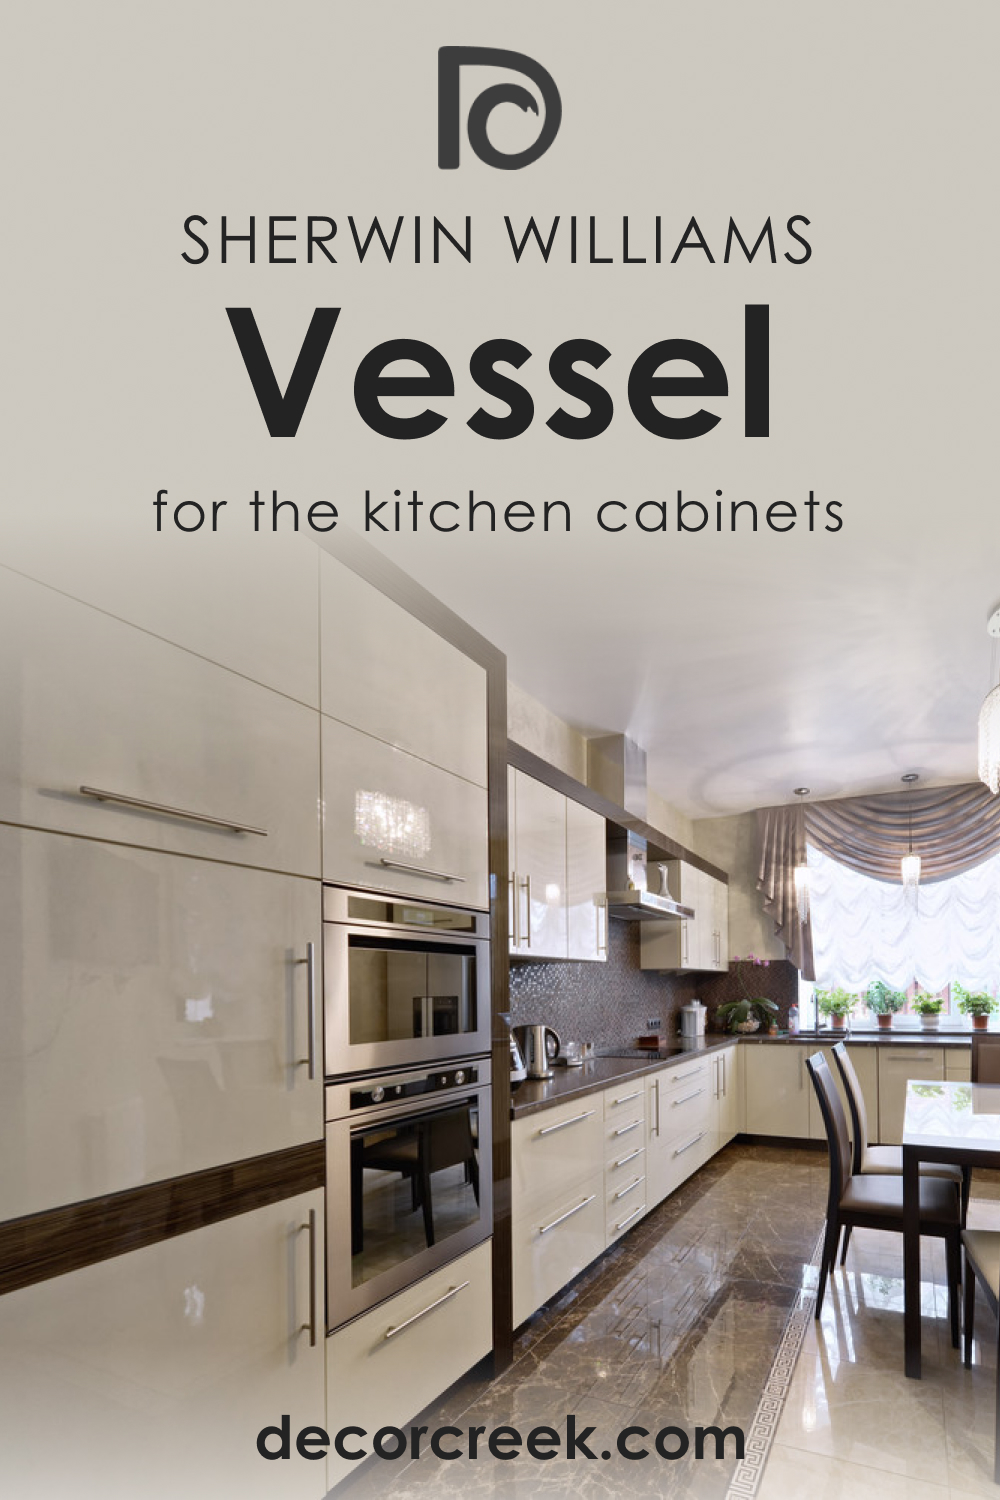 Vessel SW 9547 in the Kitchen Cabinets